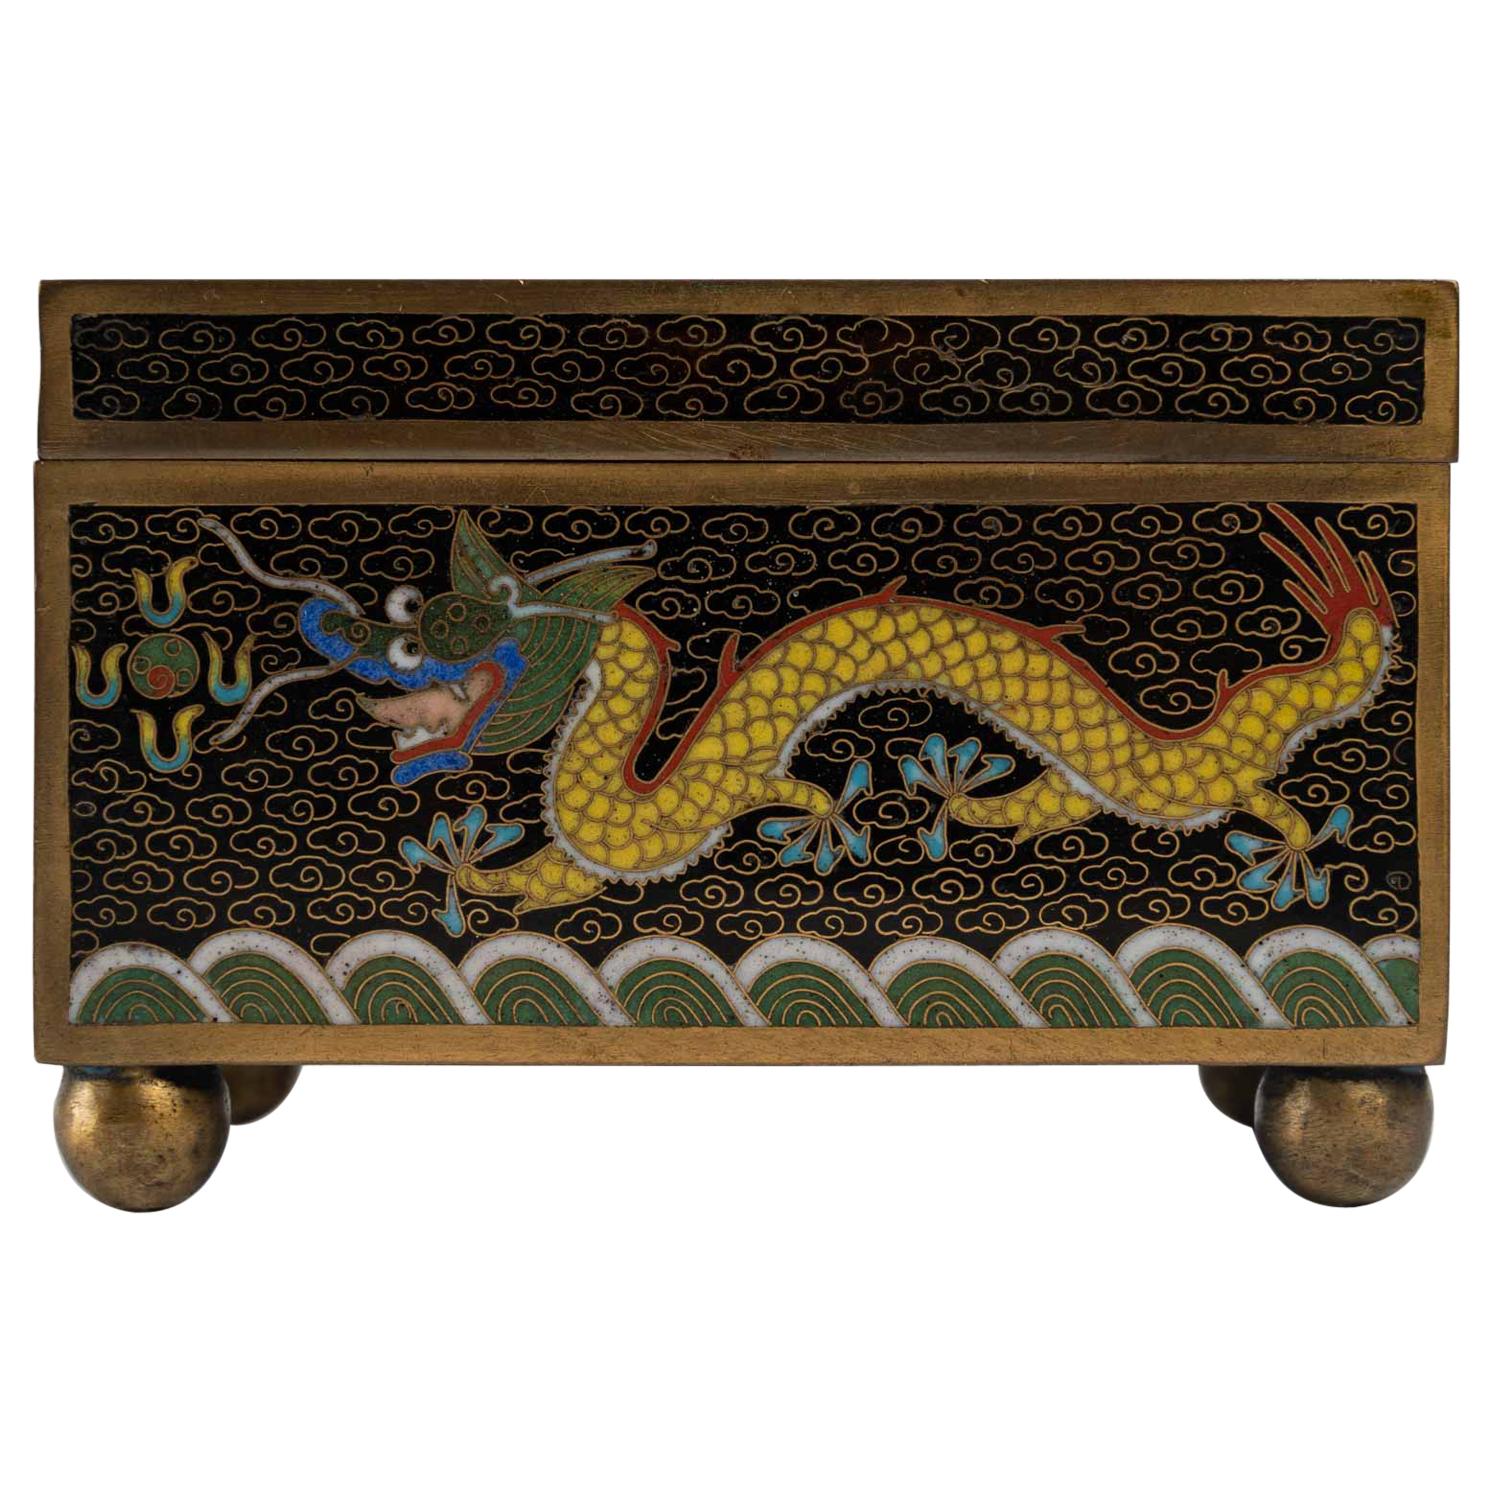 Metal Box Decorated with Cloisonne Enamels